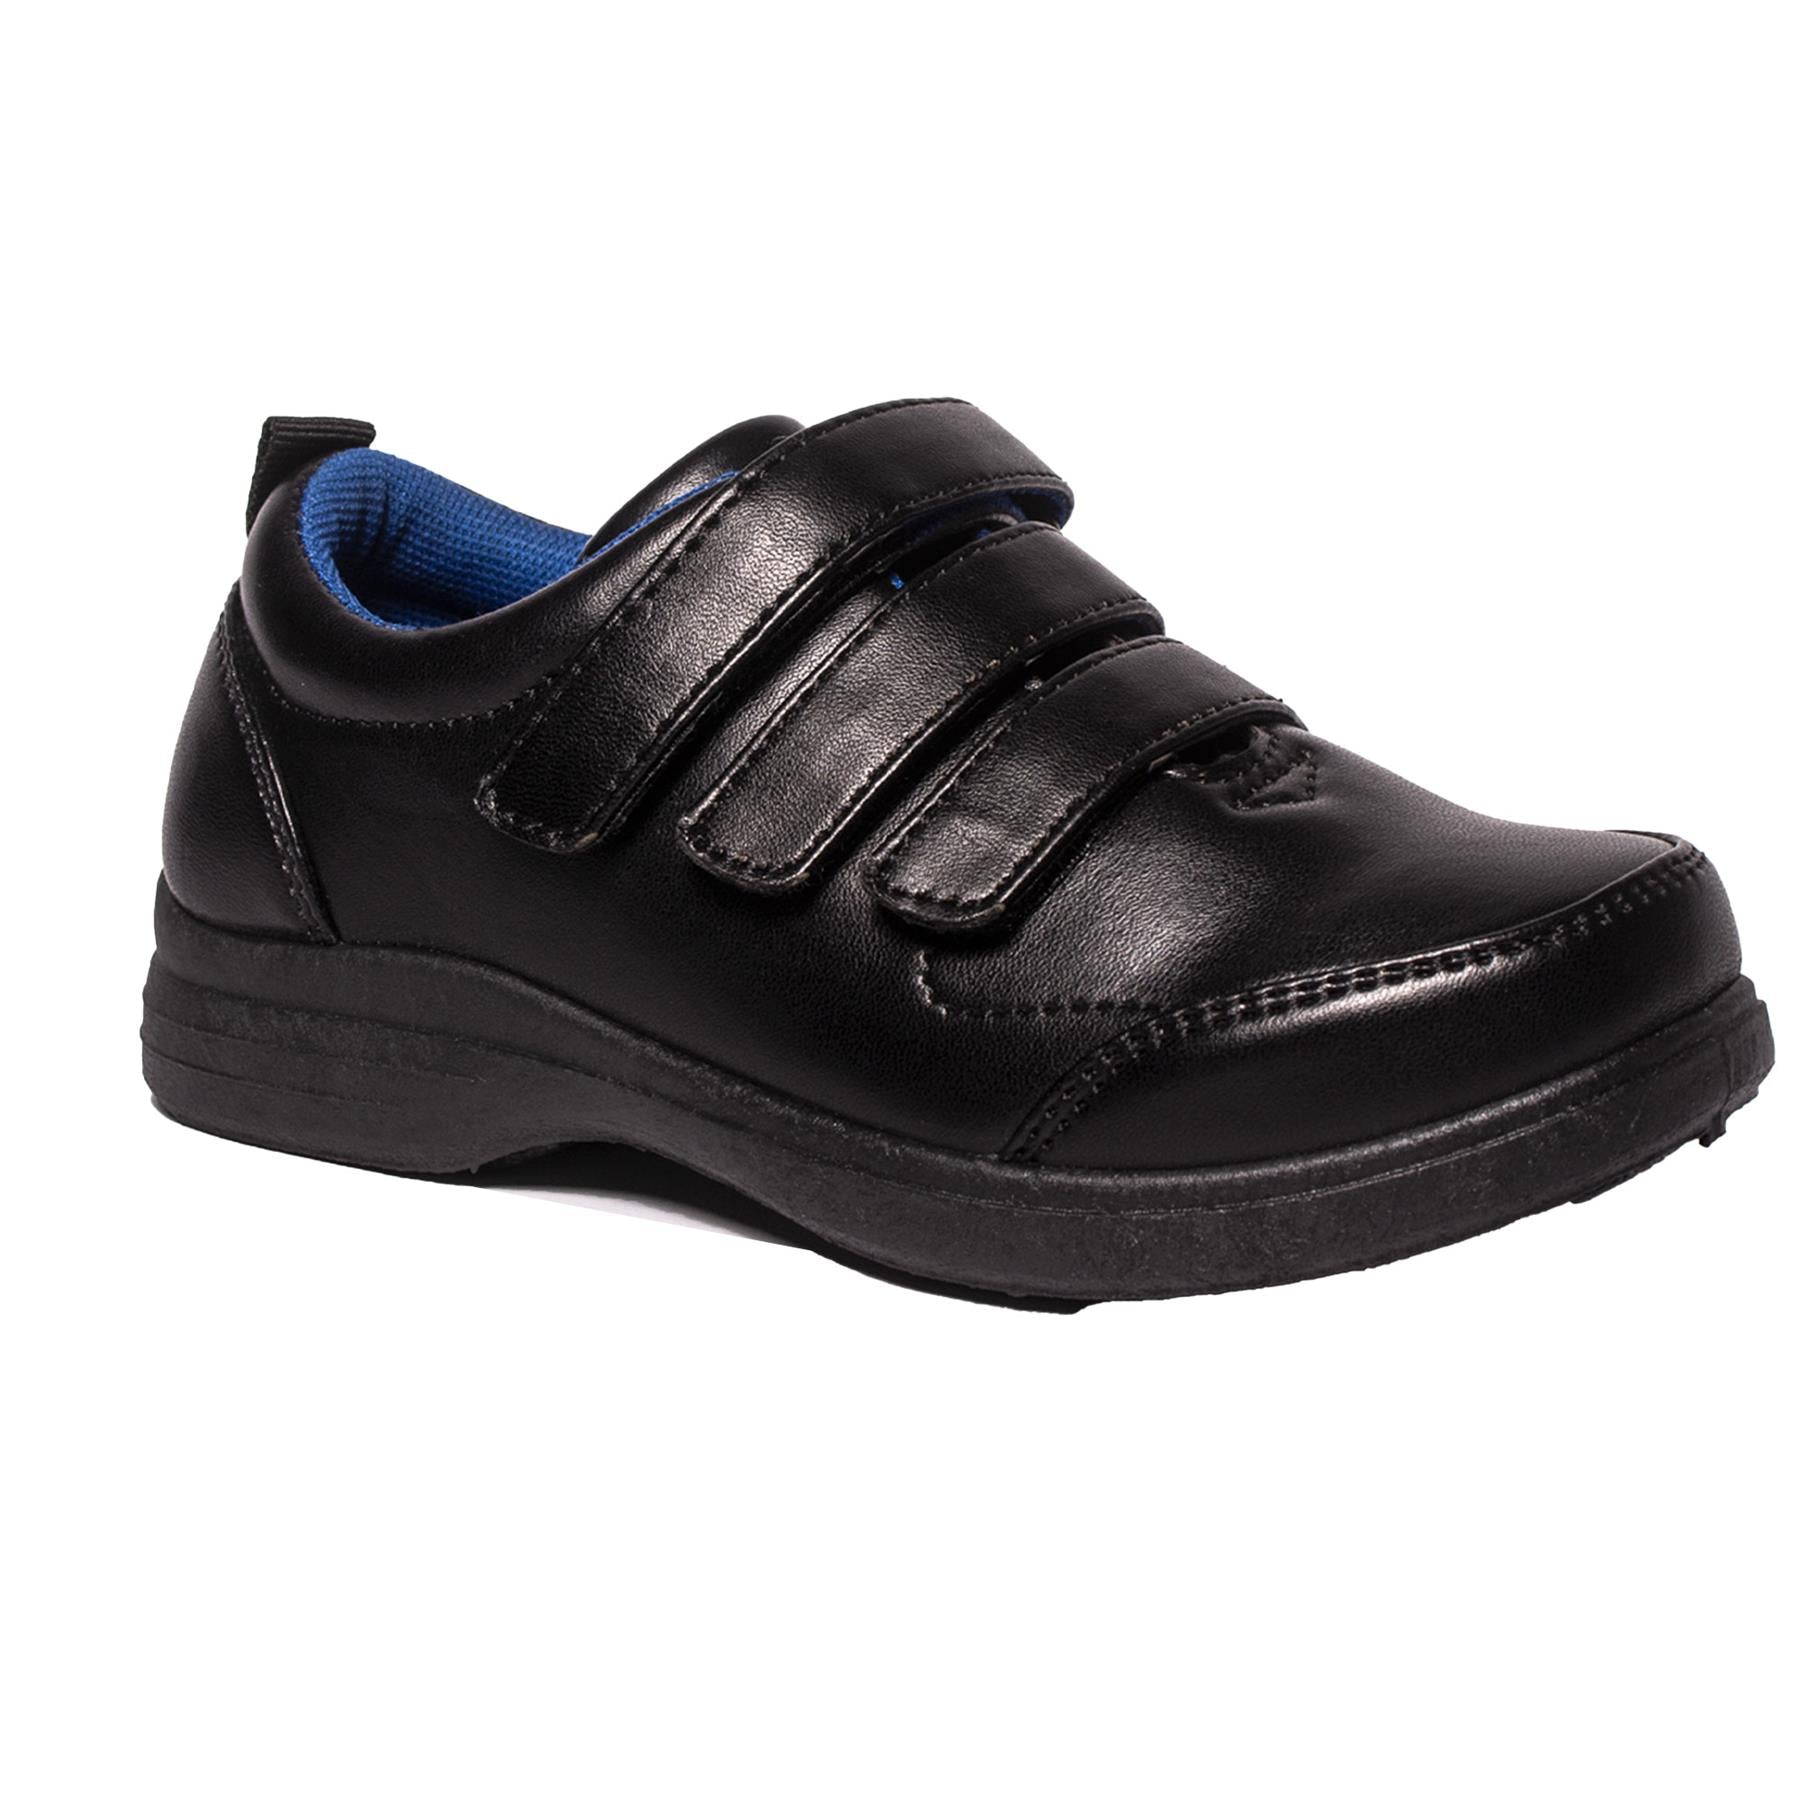 Kids Boys School Shoes Kids Formal Touch Straps Anti-Slip Sporty Trainers